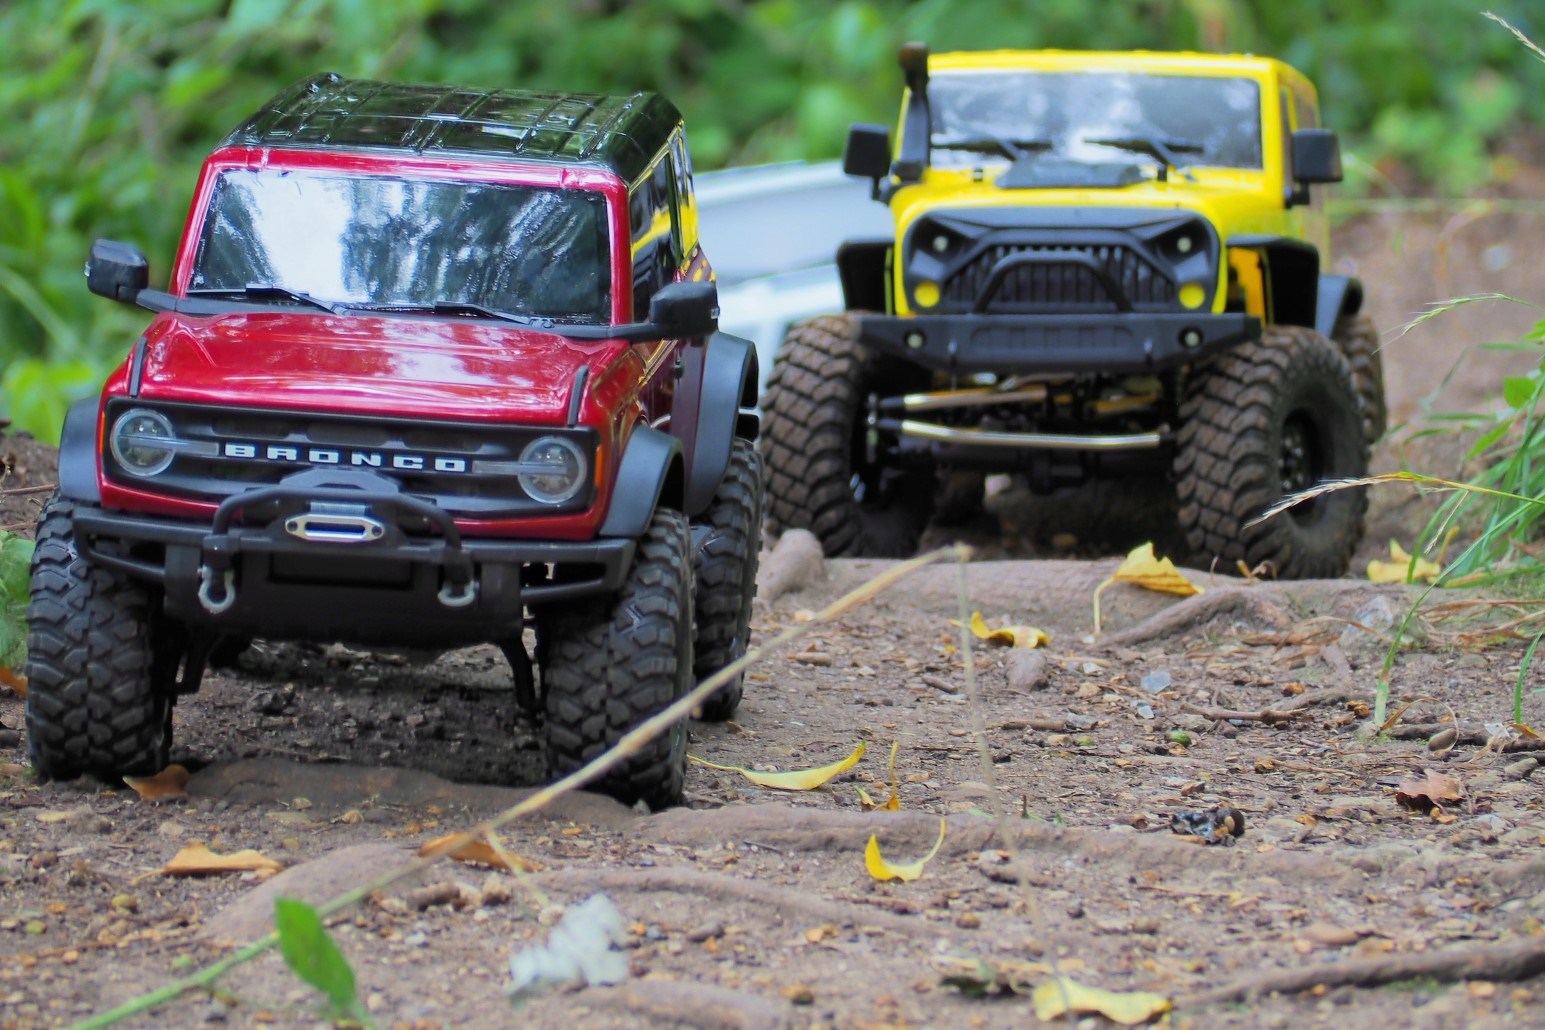 Choosing the Right RC Rock Crawler: Factors to Consider